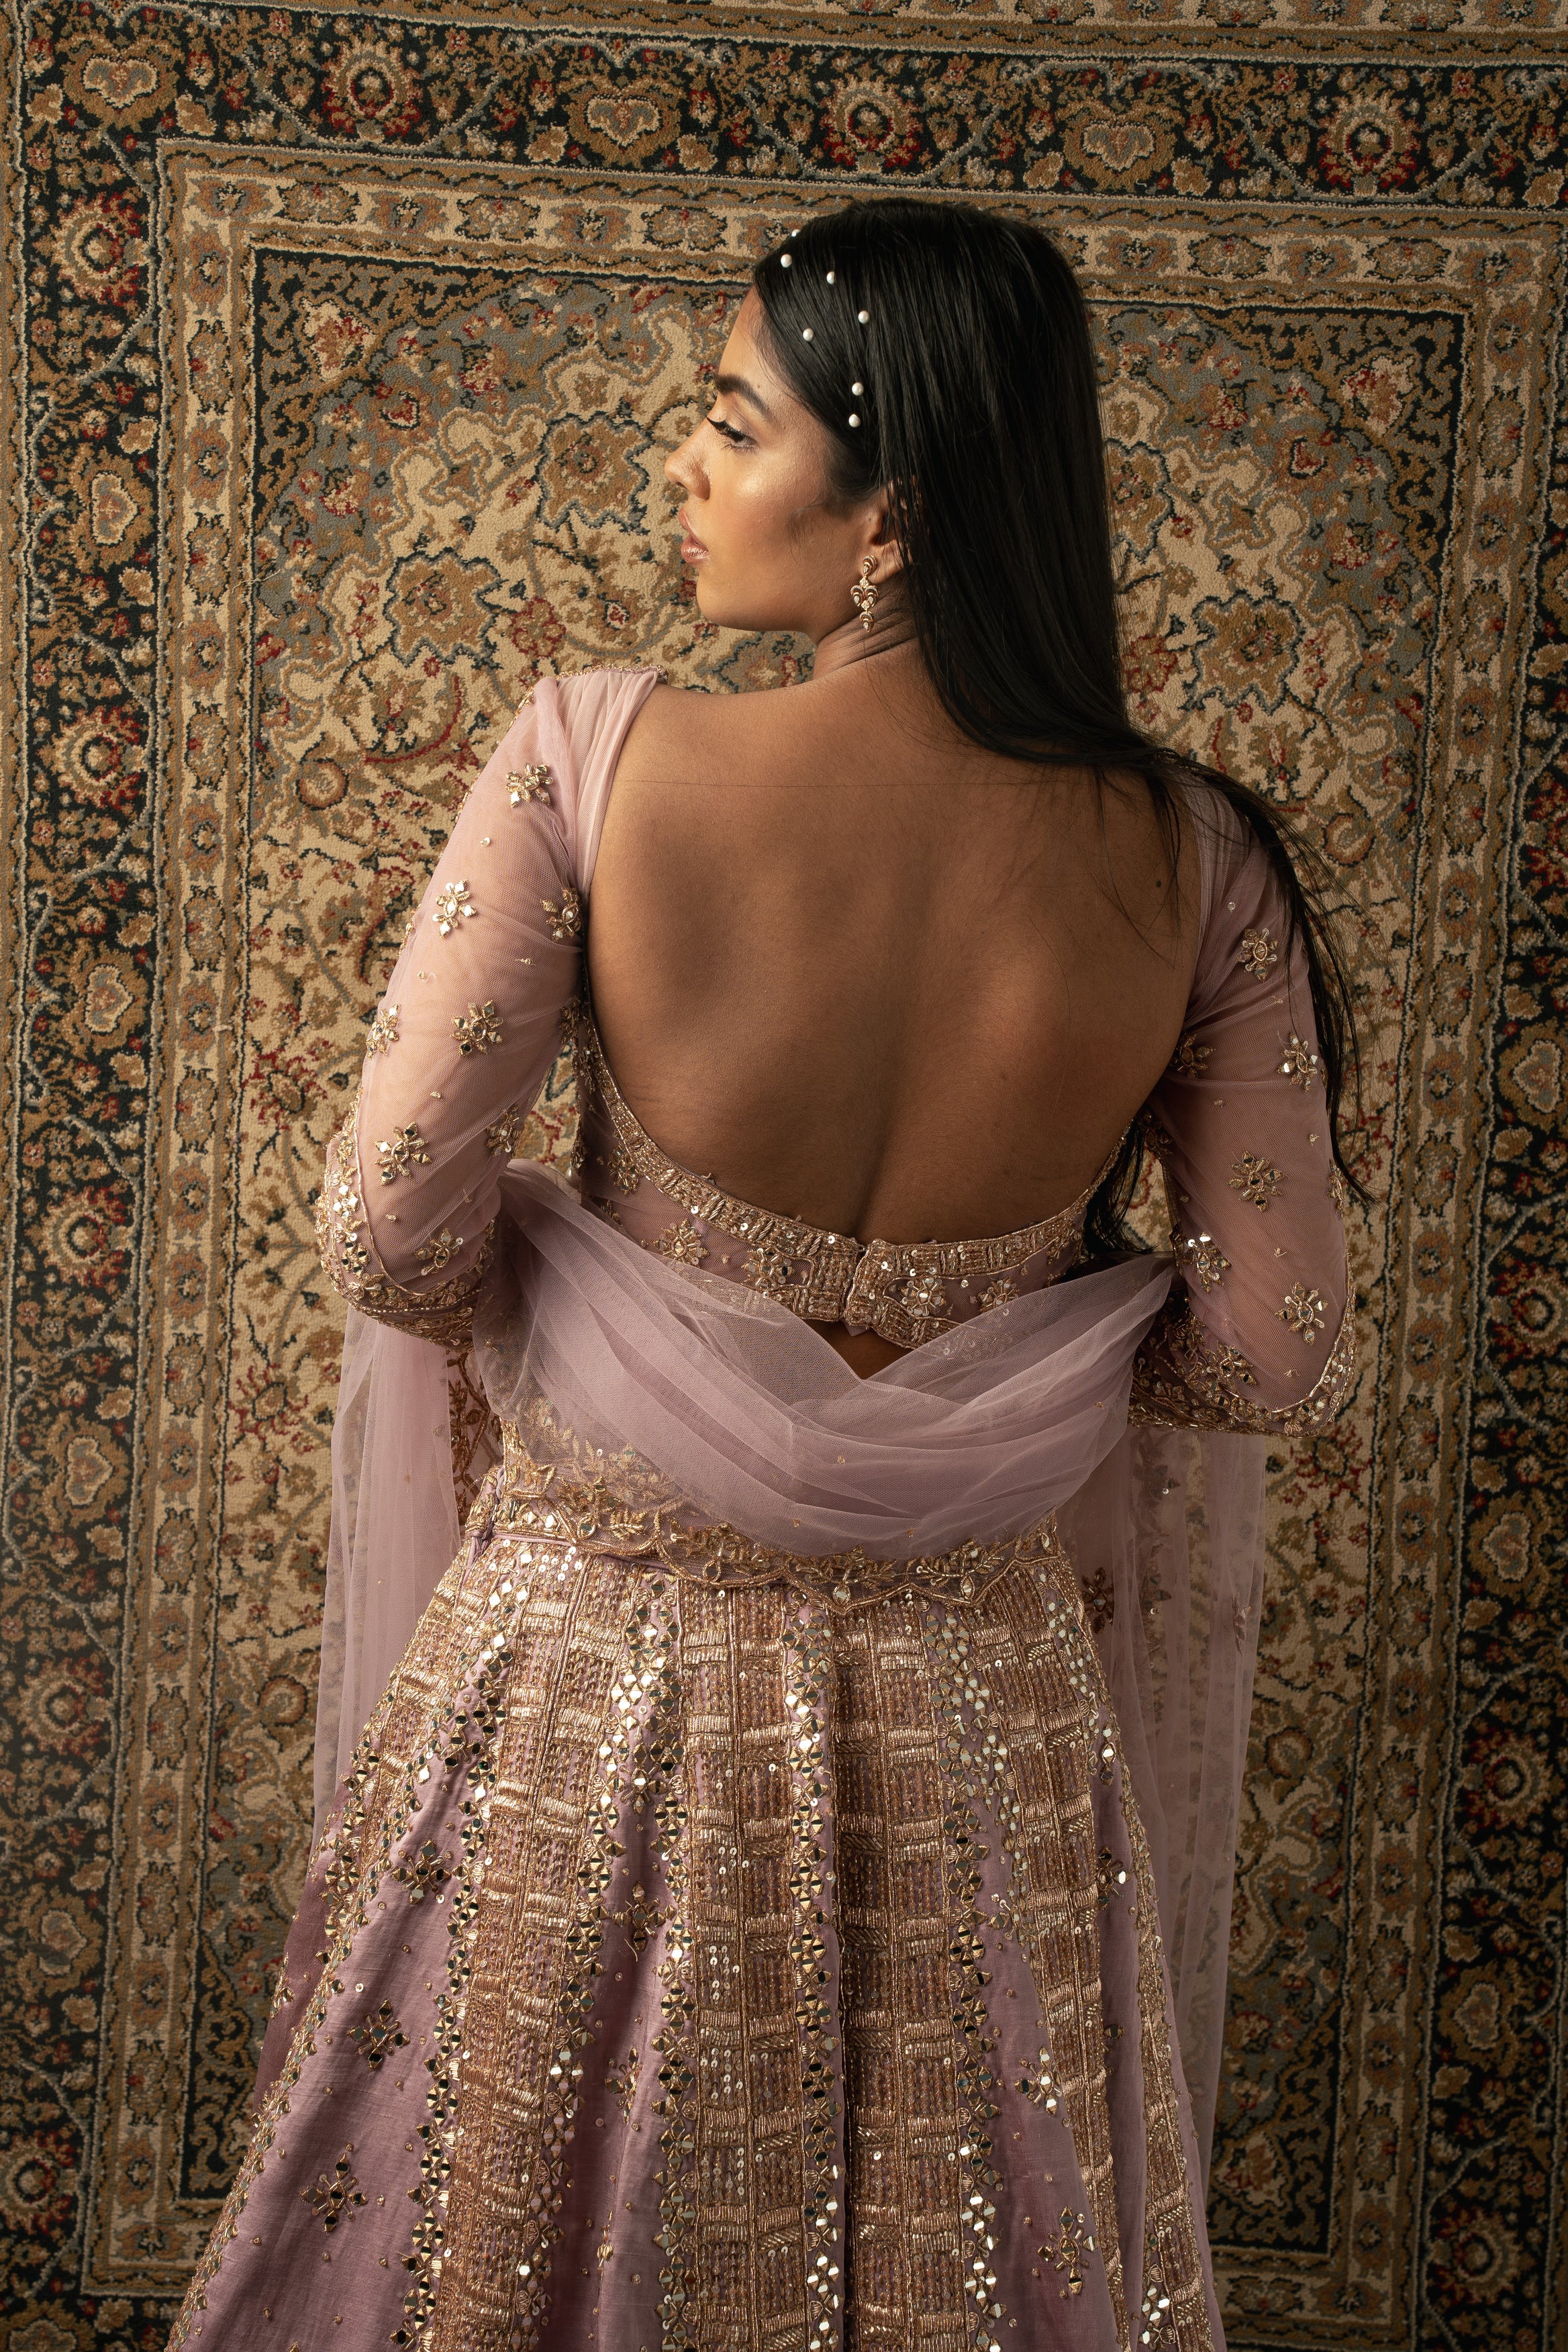 Lilac dreams: Drift into enchantment with this Linen Satin Lehenga, Net blouse, and Dupatta ensemble, a perfect blend of tradition and modernity.